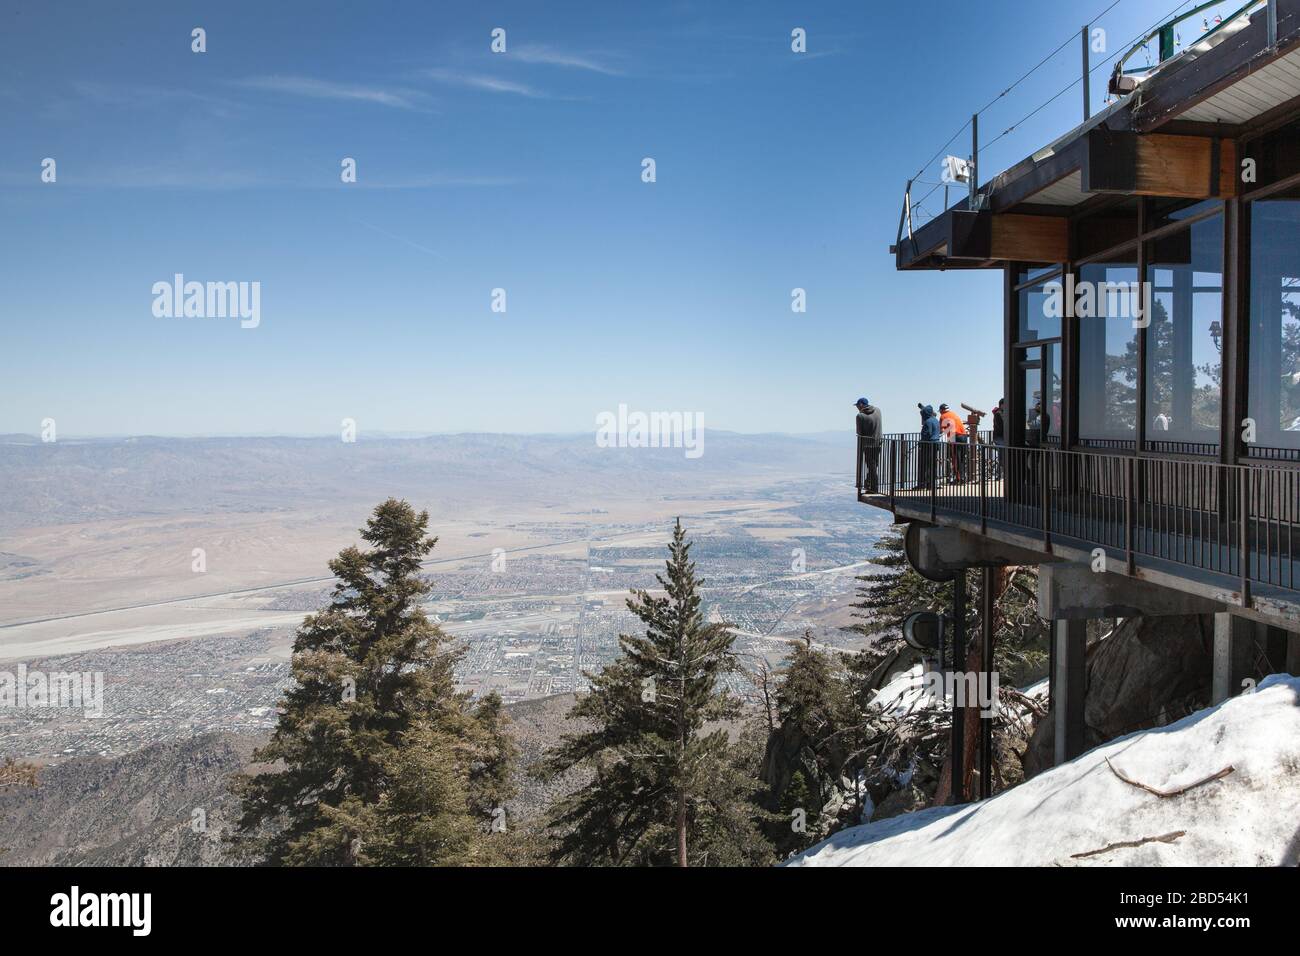 View over Palm Springs and Coachella Valley from Mount San Jacinto State Park by the Palm Springs Aerial Tram in California Stock Photo